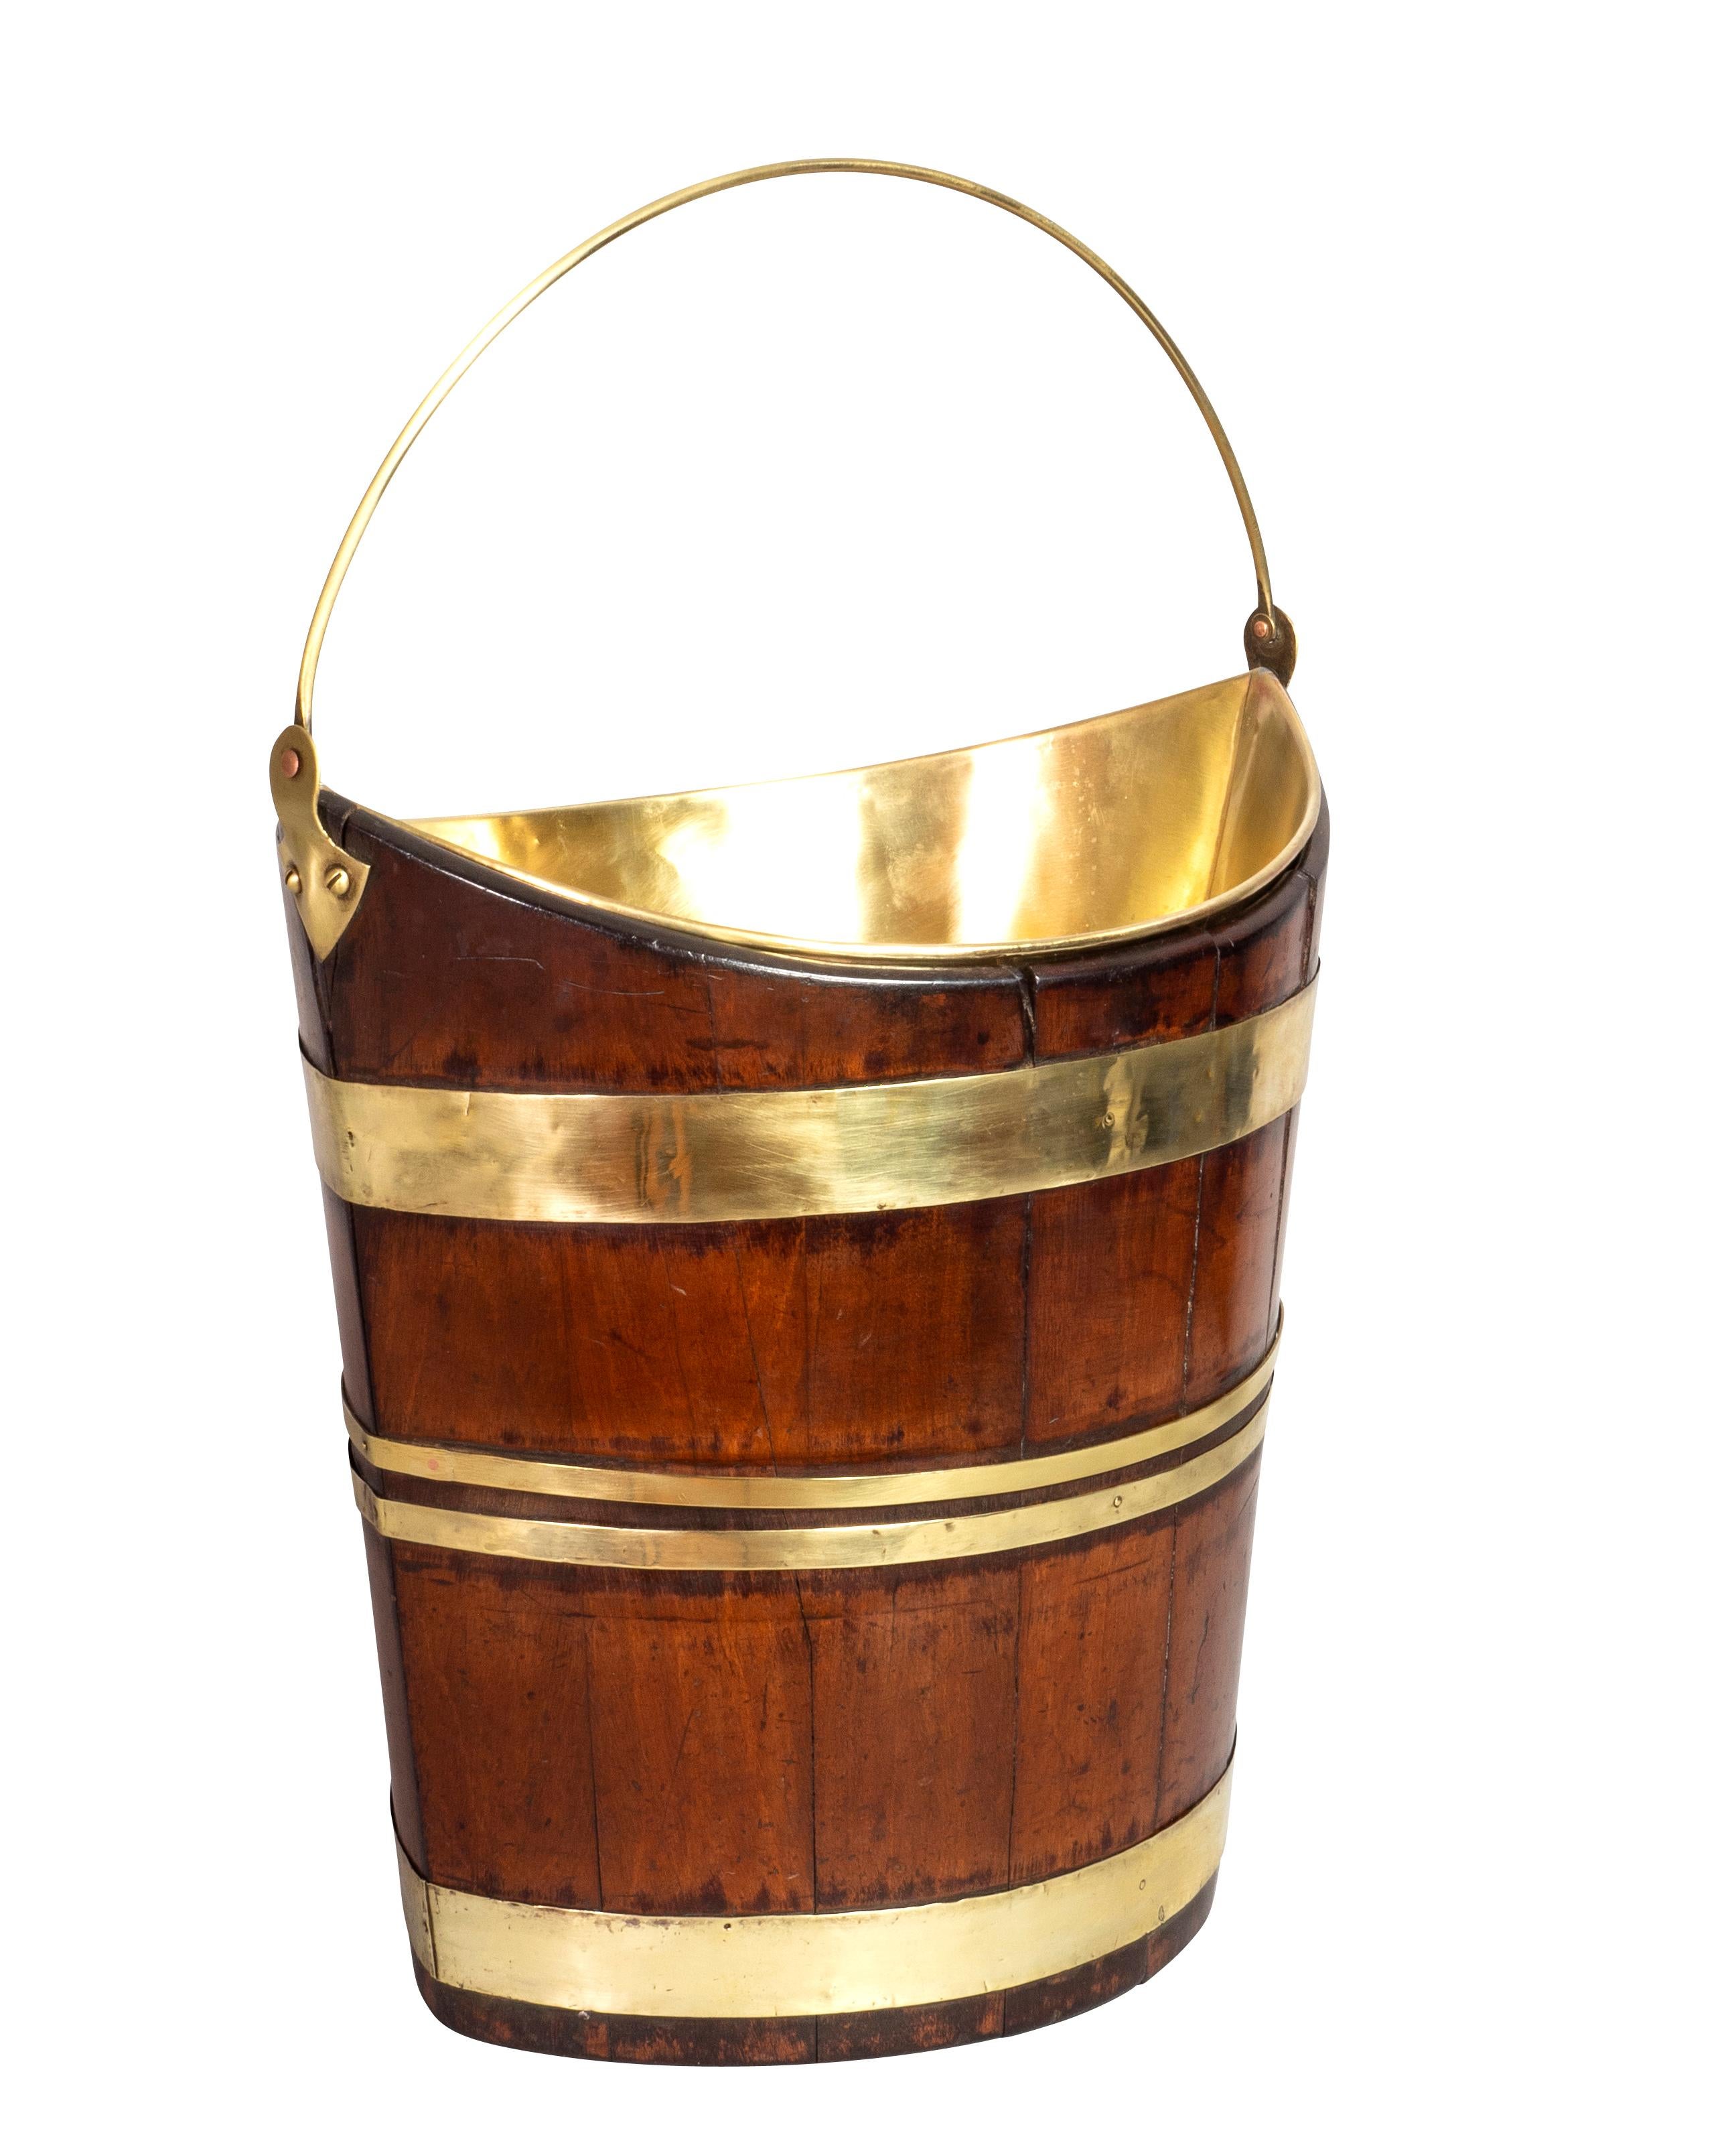 Oval with brass liner and handle, conforming body with brass strapping.